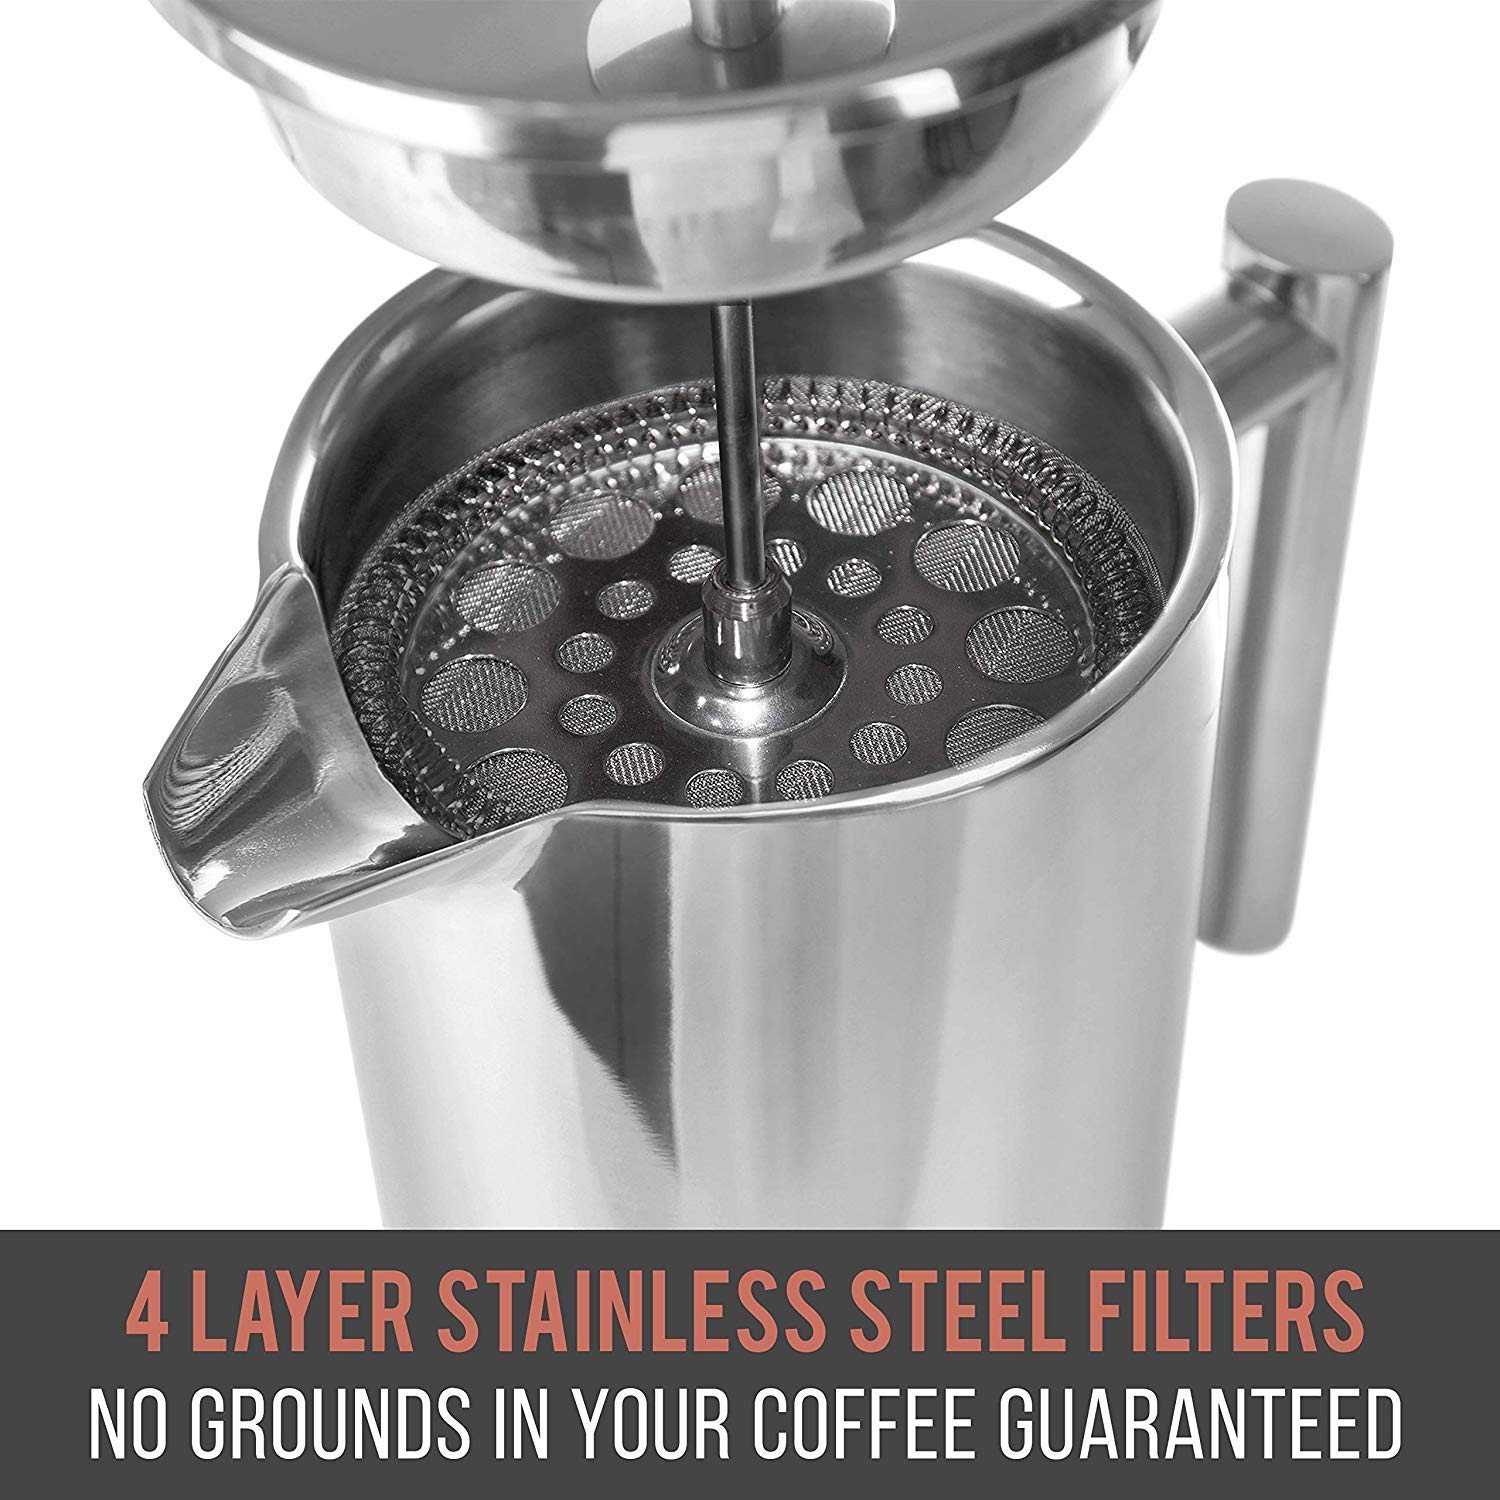 **Brand New Mueller Stainless Steel French Press ** for Sale in